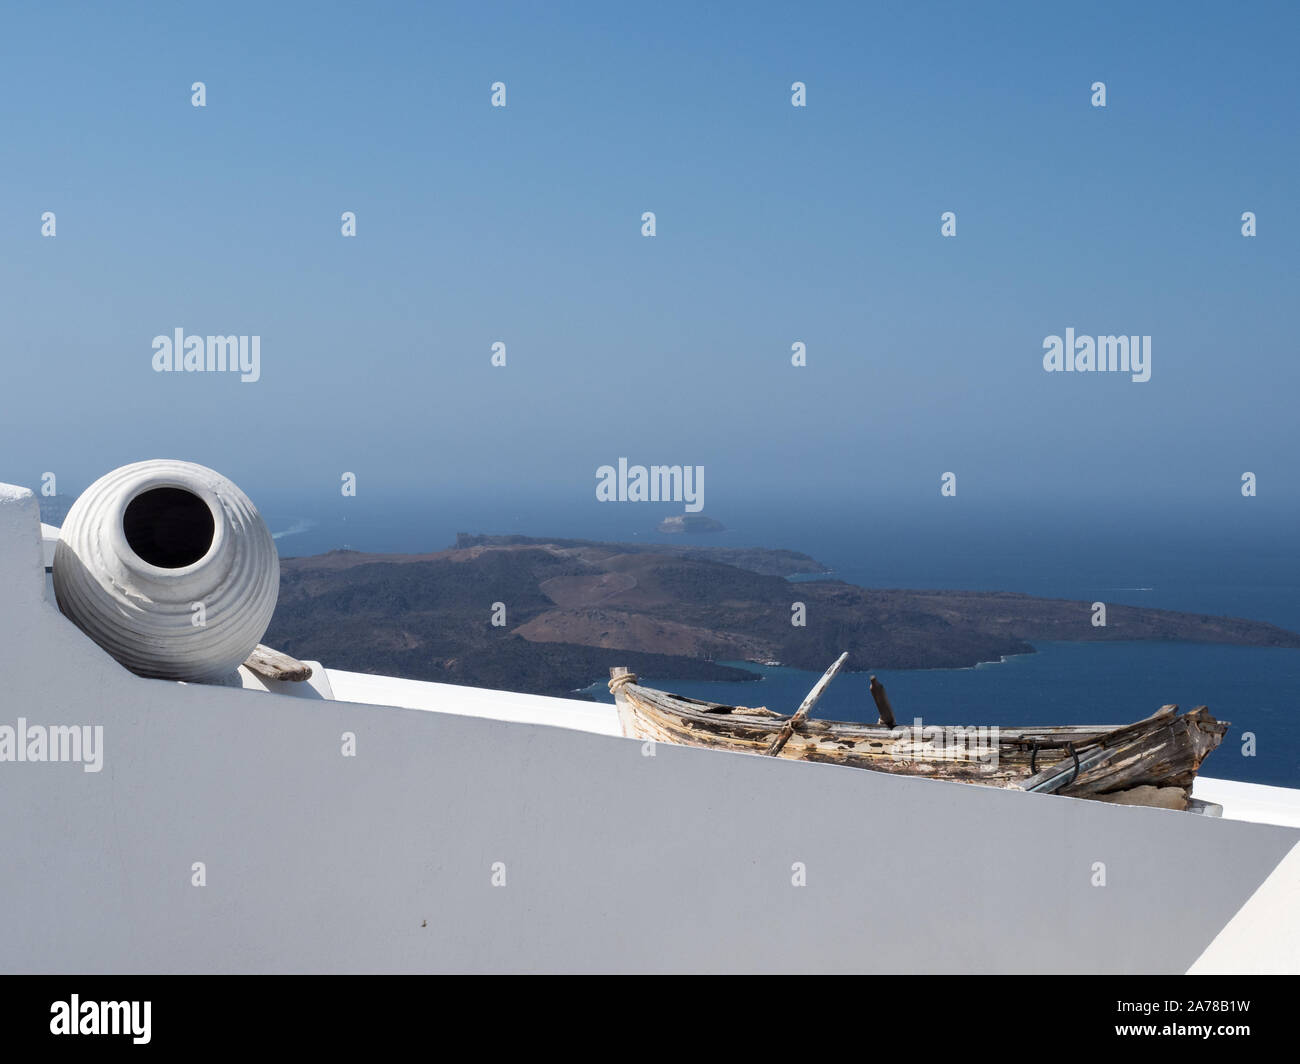 a view of vase pot salvaged, repurposed rowing boat on top a white wall distant mountains sea blue sky horizon Fira Santorini Stock Photo